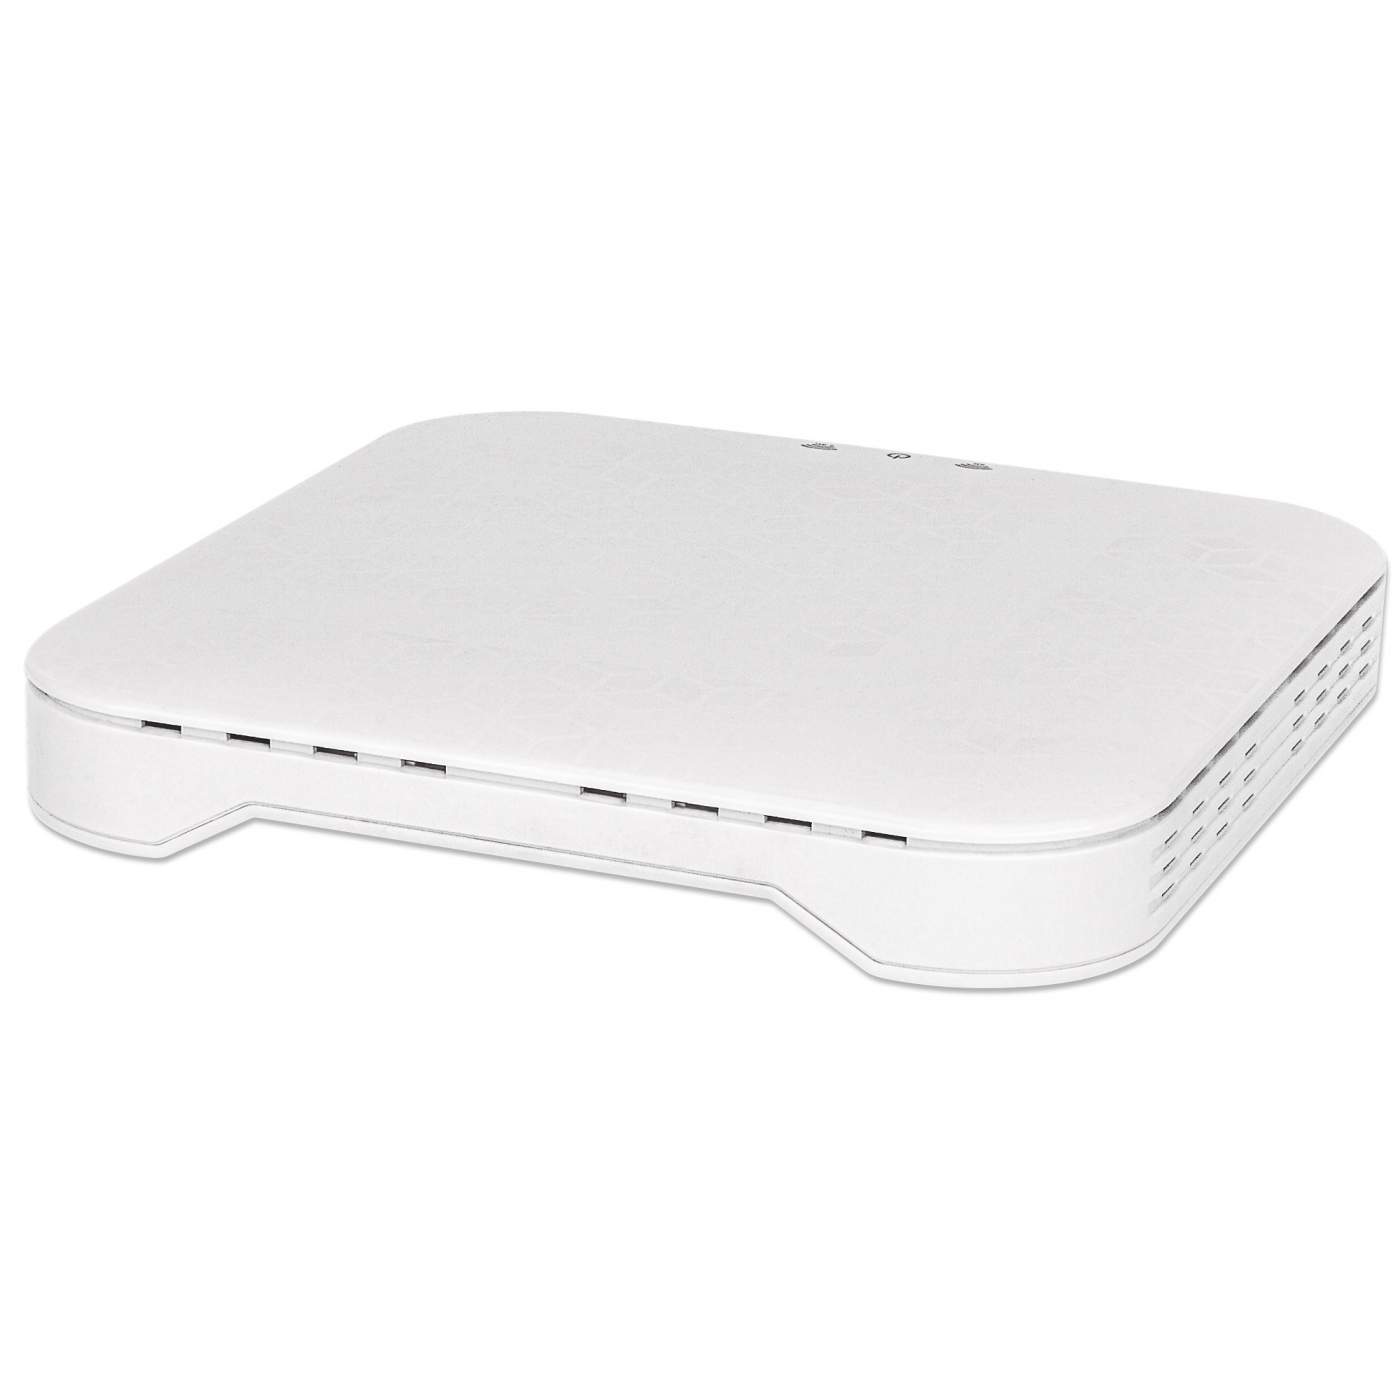 Manageable Wireless AC1300 Dual-Band Gigabit PoE Indoor Access Point and Router Image 4